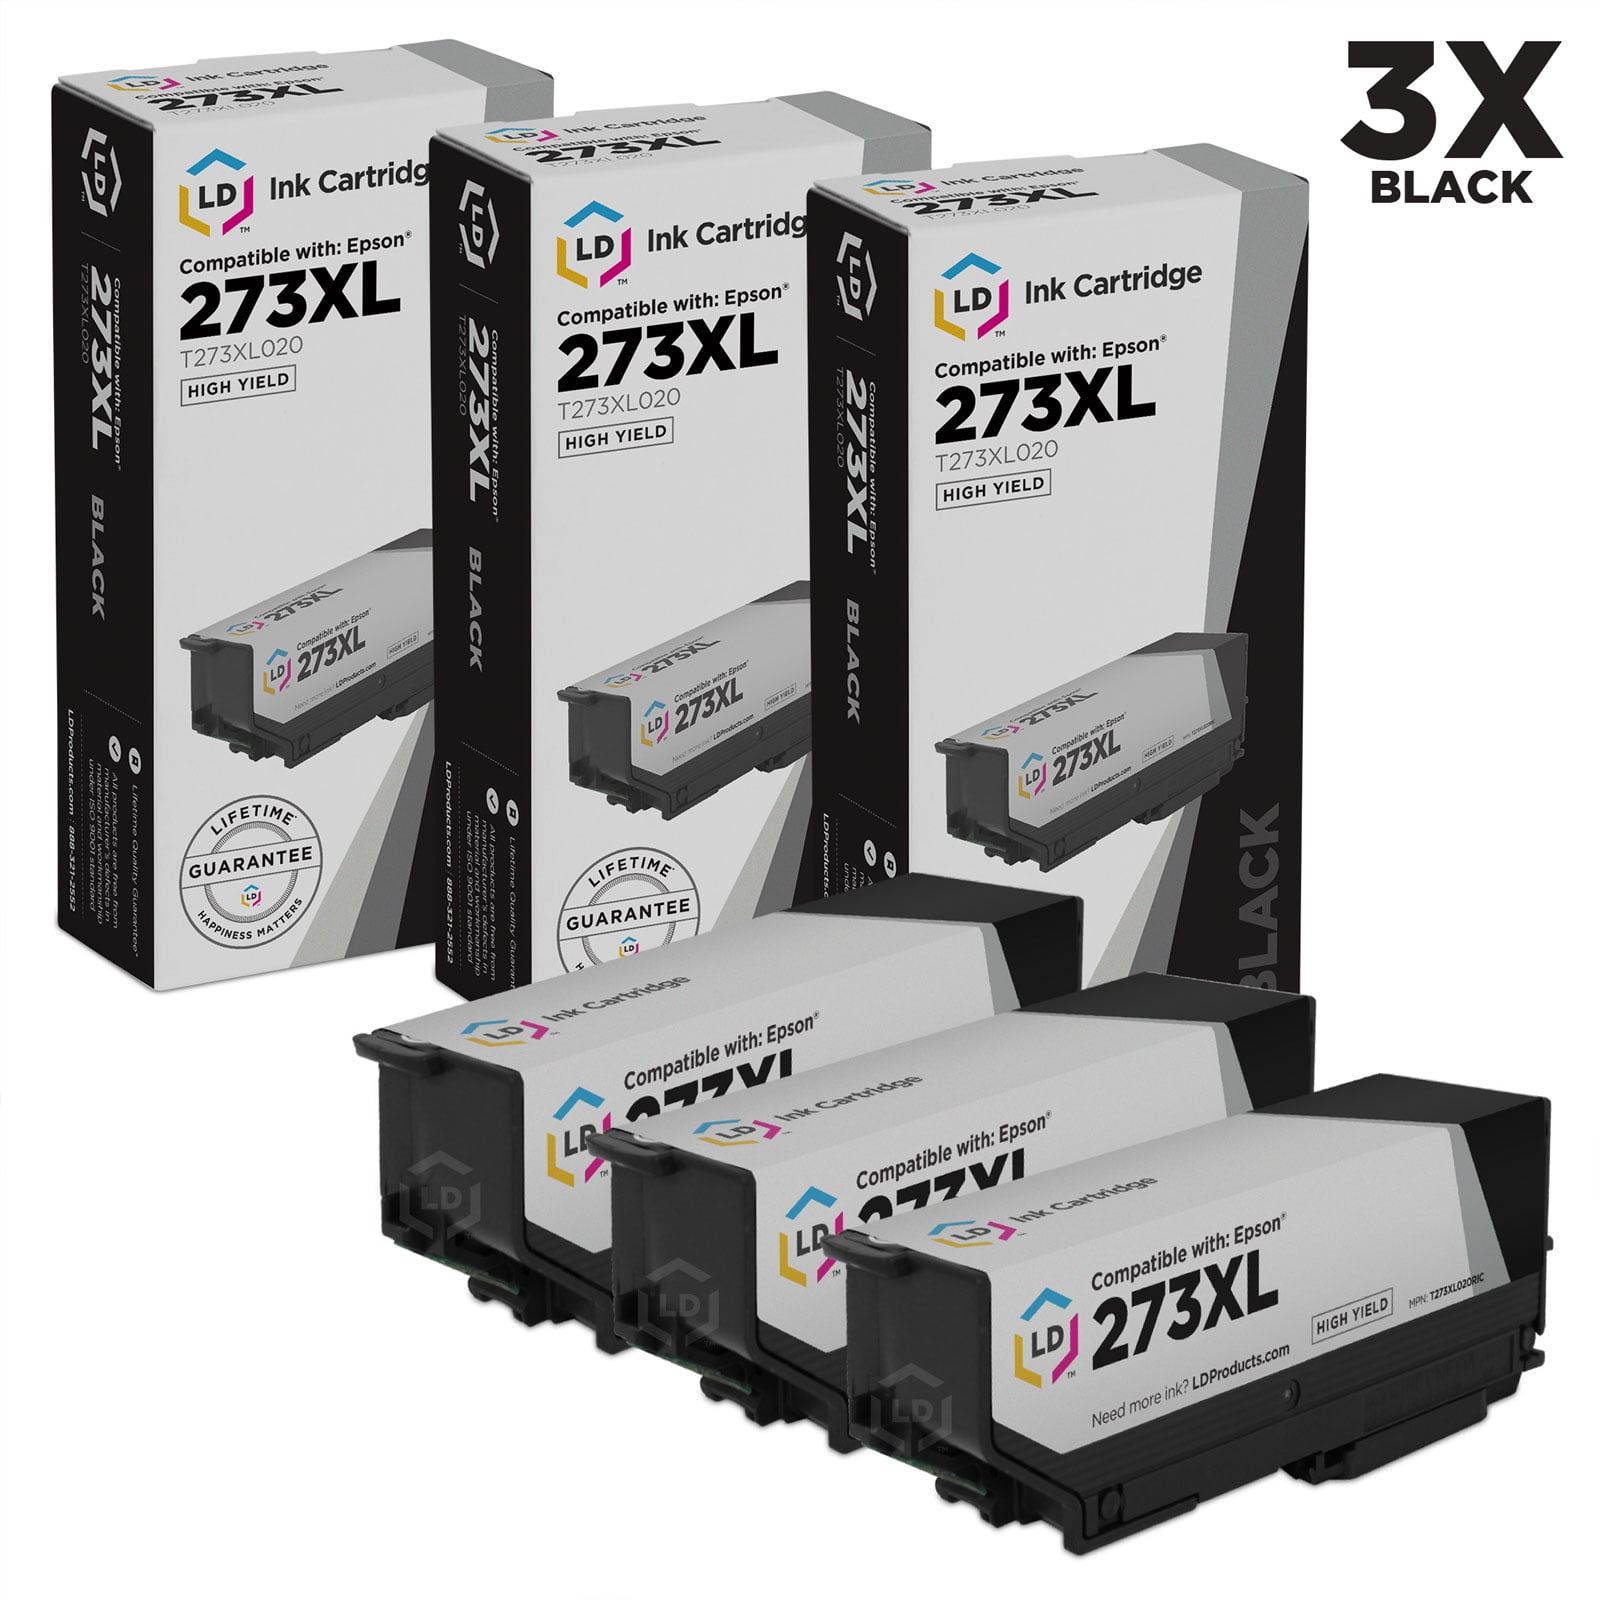 LD Compatible Replacement for Epson 273XL / T273XL020 Pack of 5 High Yield  Black Cartridges for use in Expression XP-520, XP-600, XP-610, XP-620, XP-800,  XP-810 & XP-820 